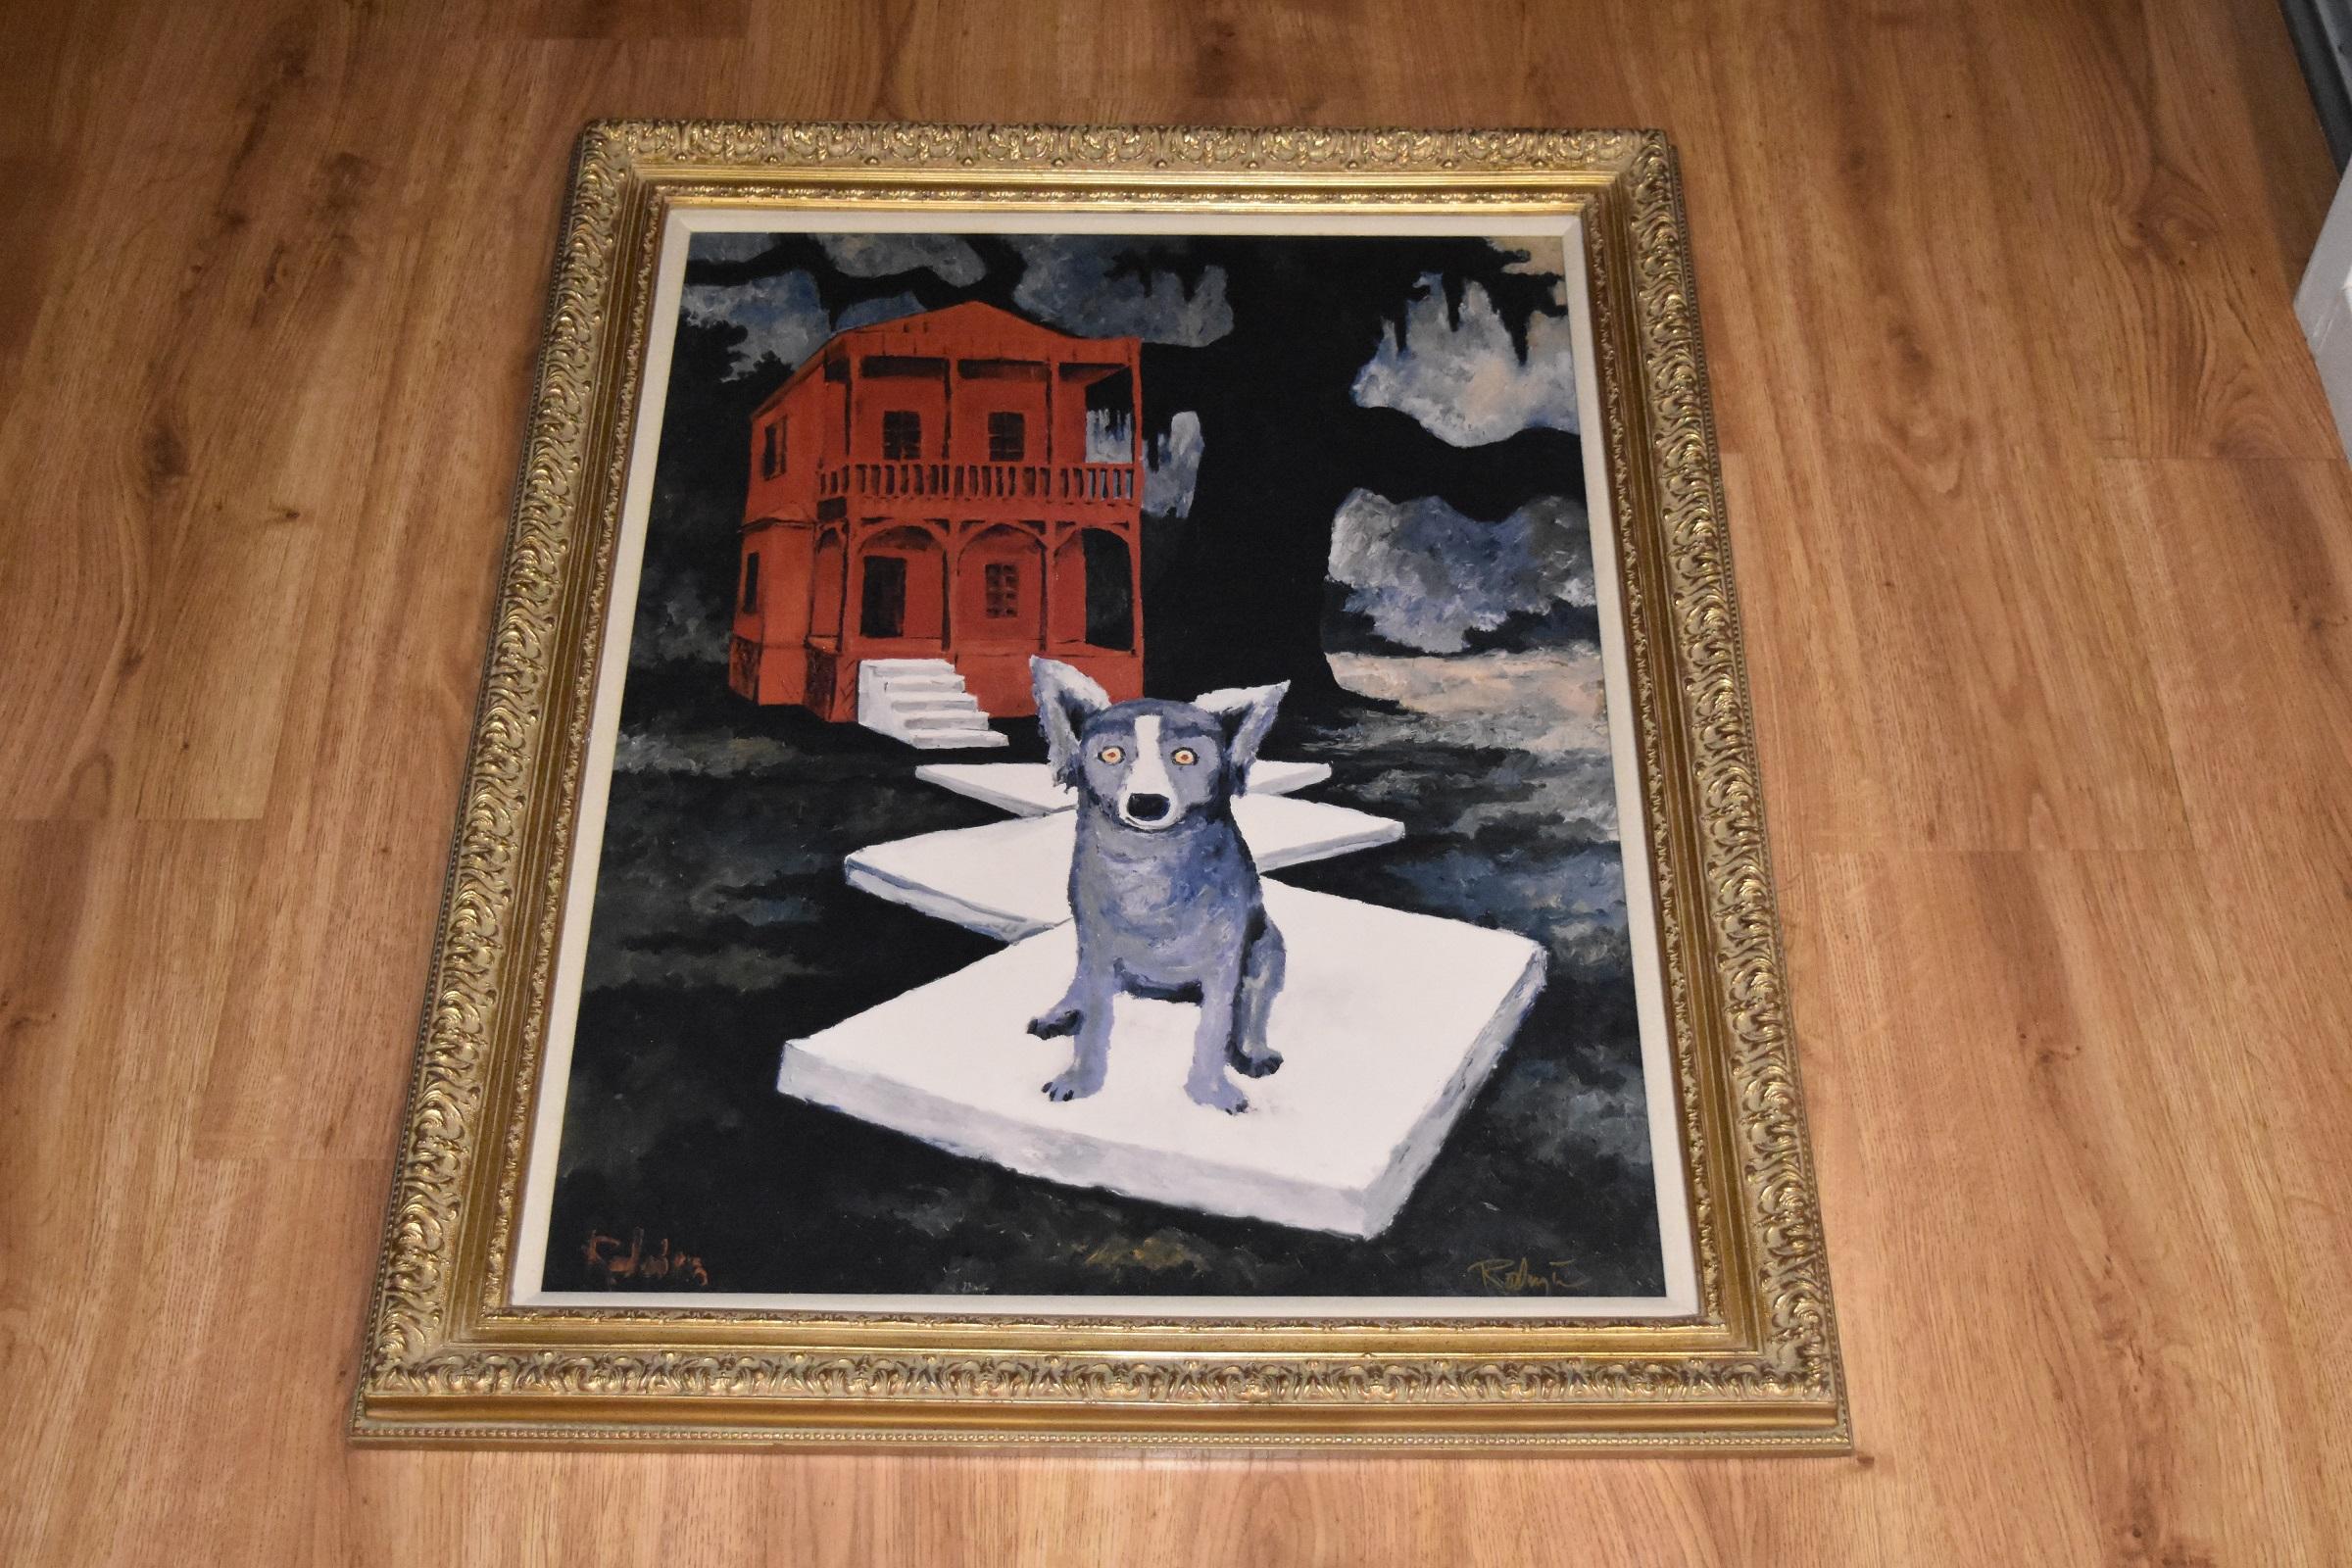 It's Tiffany - Giclee on Canvas Board - Signed -  Blue Dog - Print by George Rodrigue